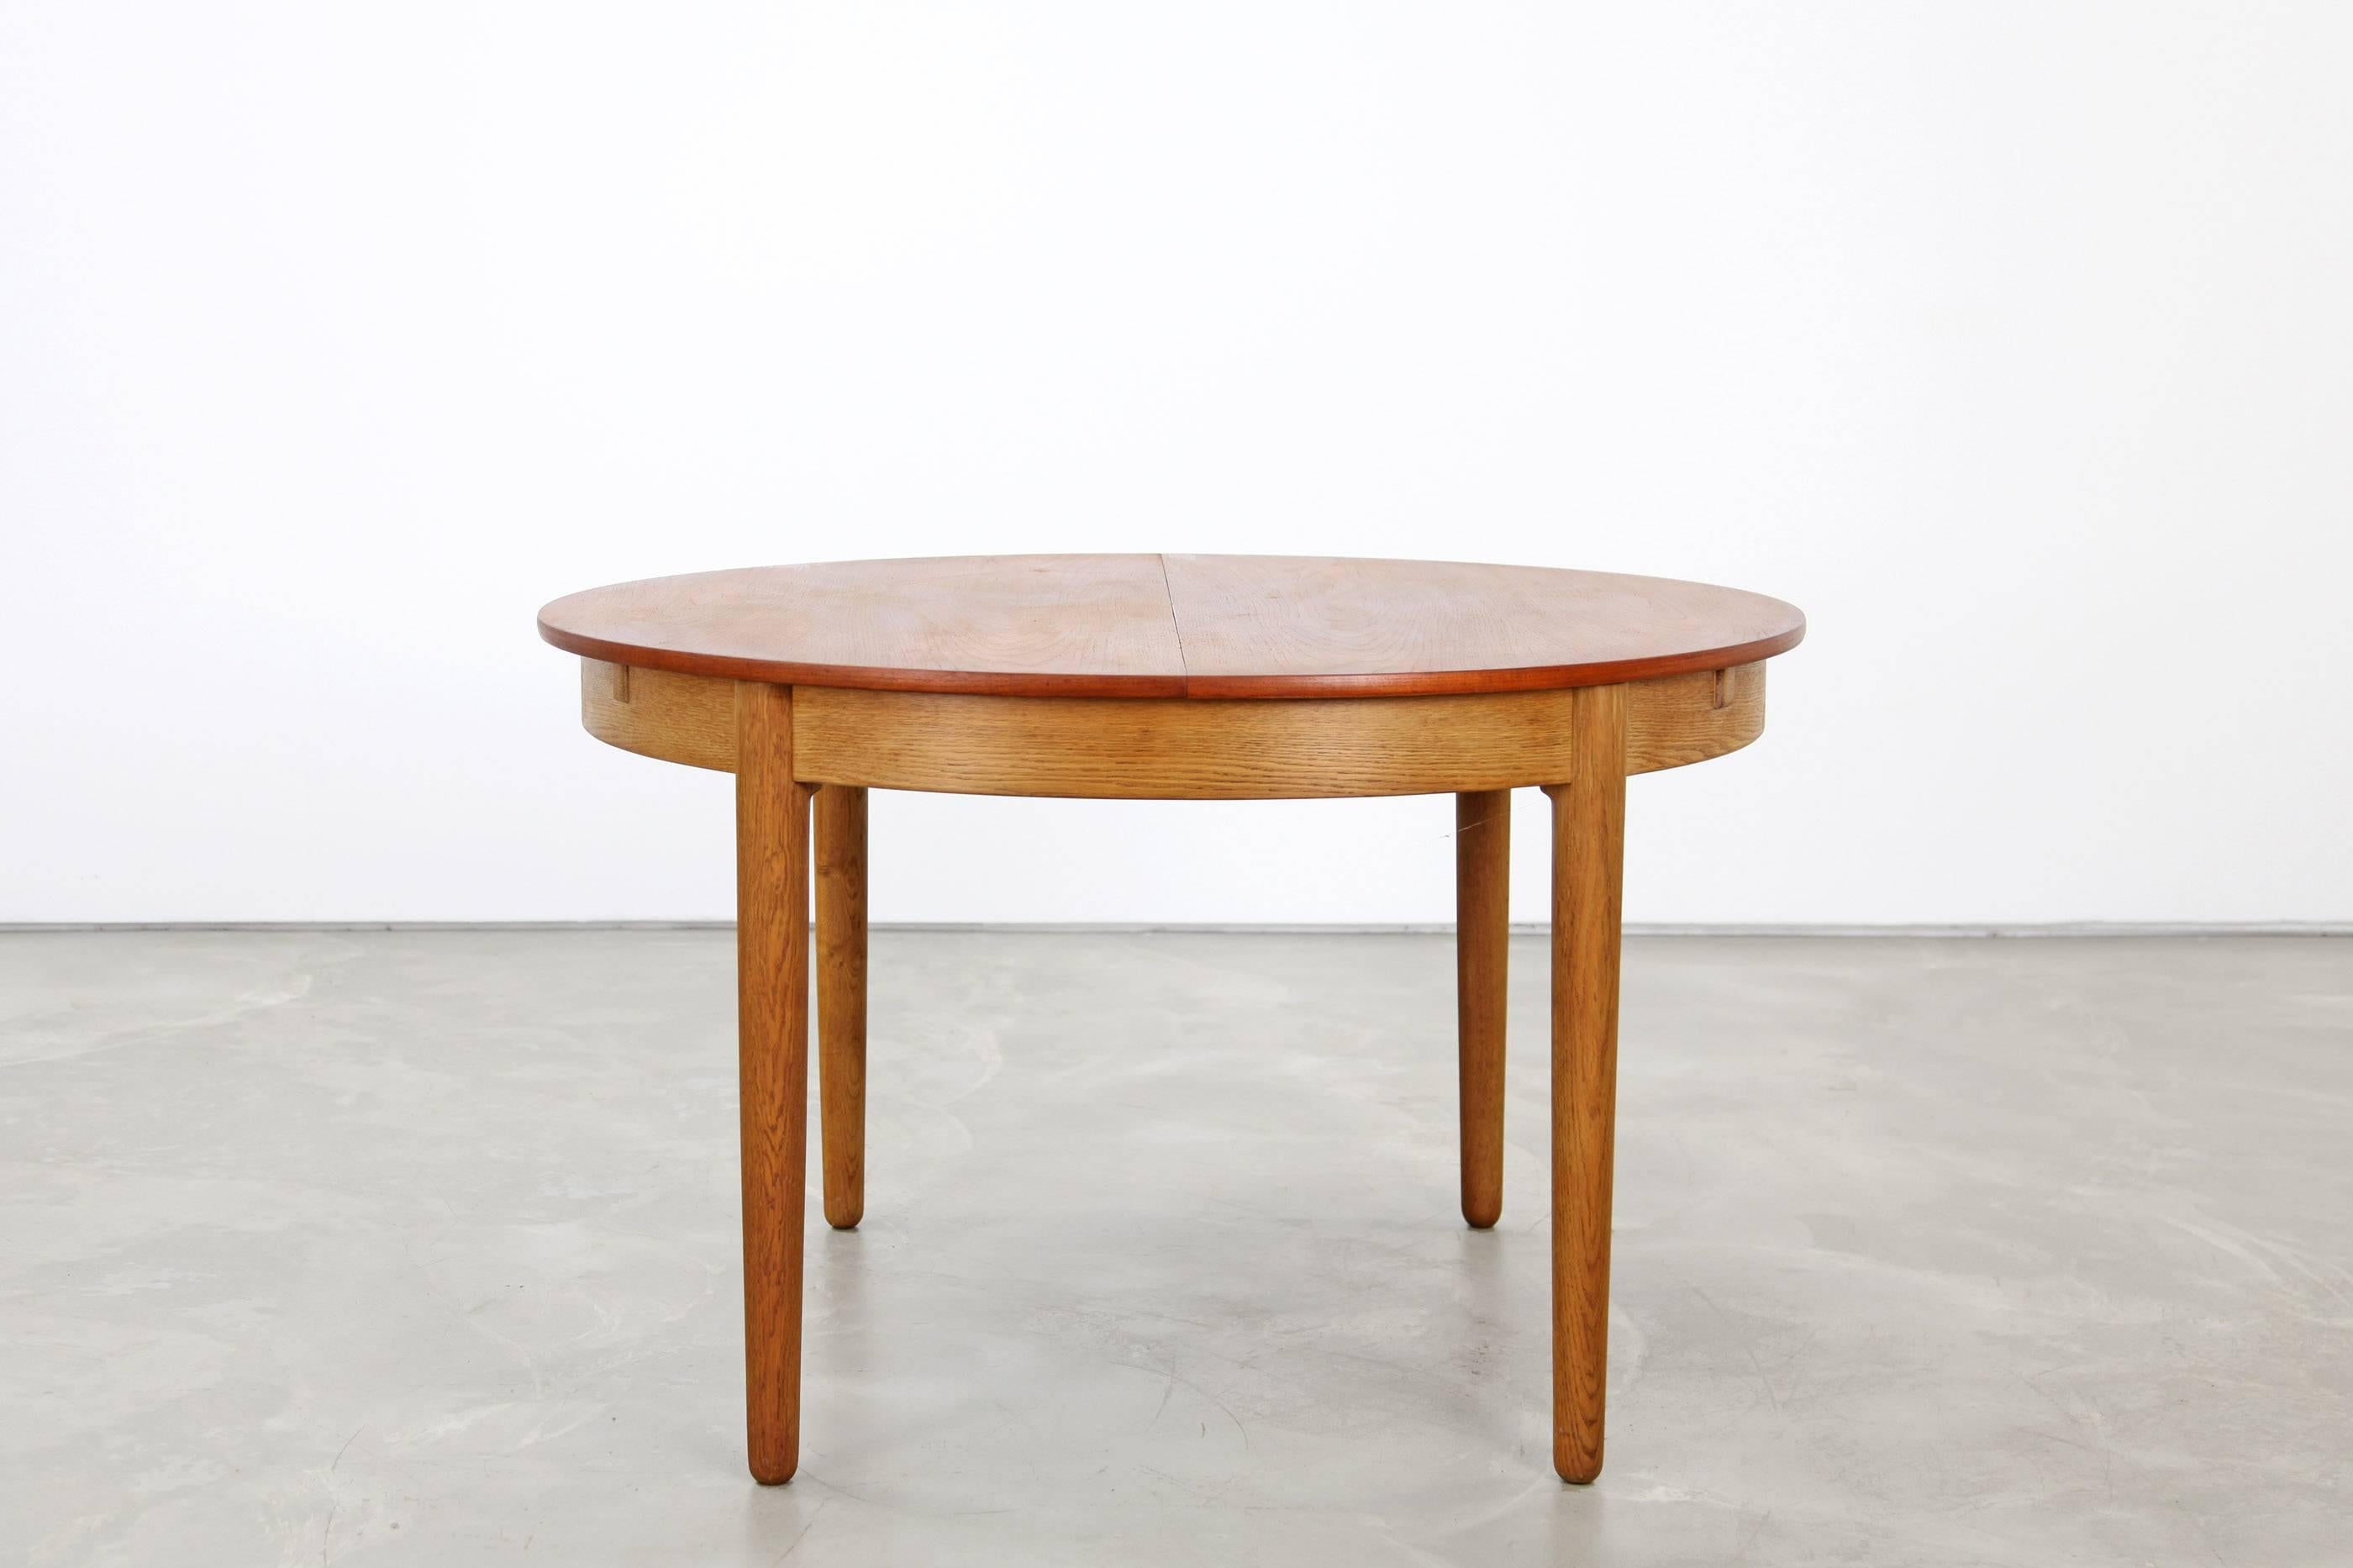 This danish dining table by Hans Wegner for Andreas Tuck shows excellent craftsmanship and is made of teak and oak. It features one extension leaf. It extends to 182 cm/ 71.75".